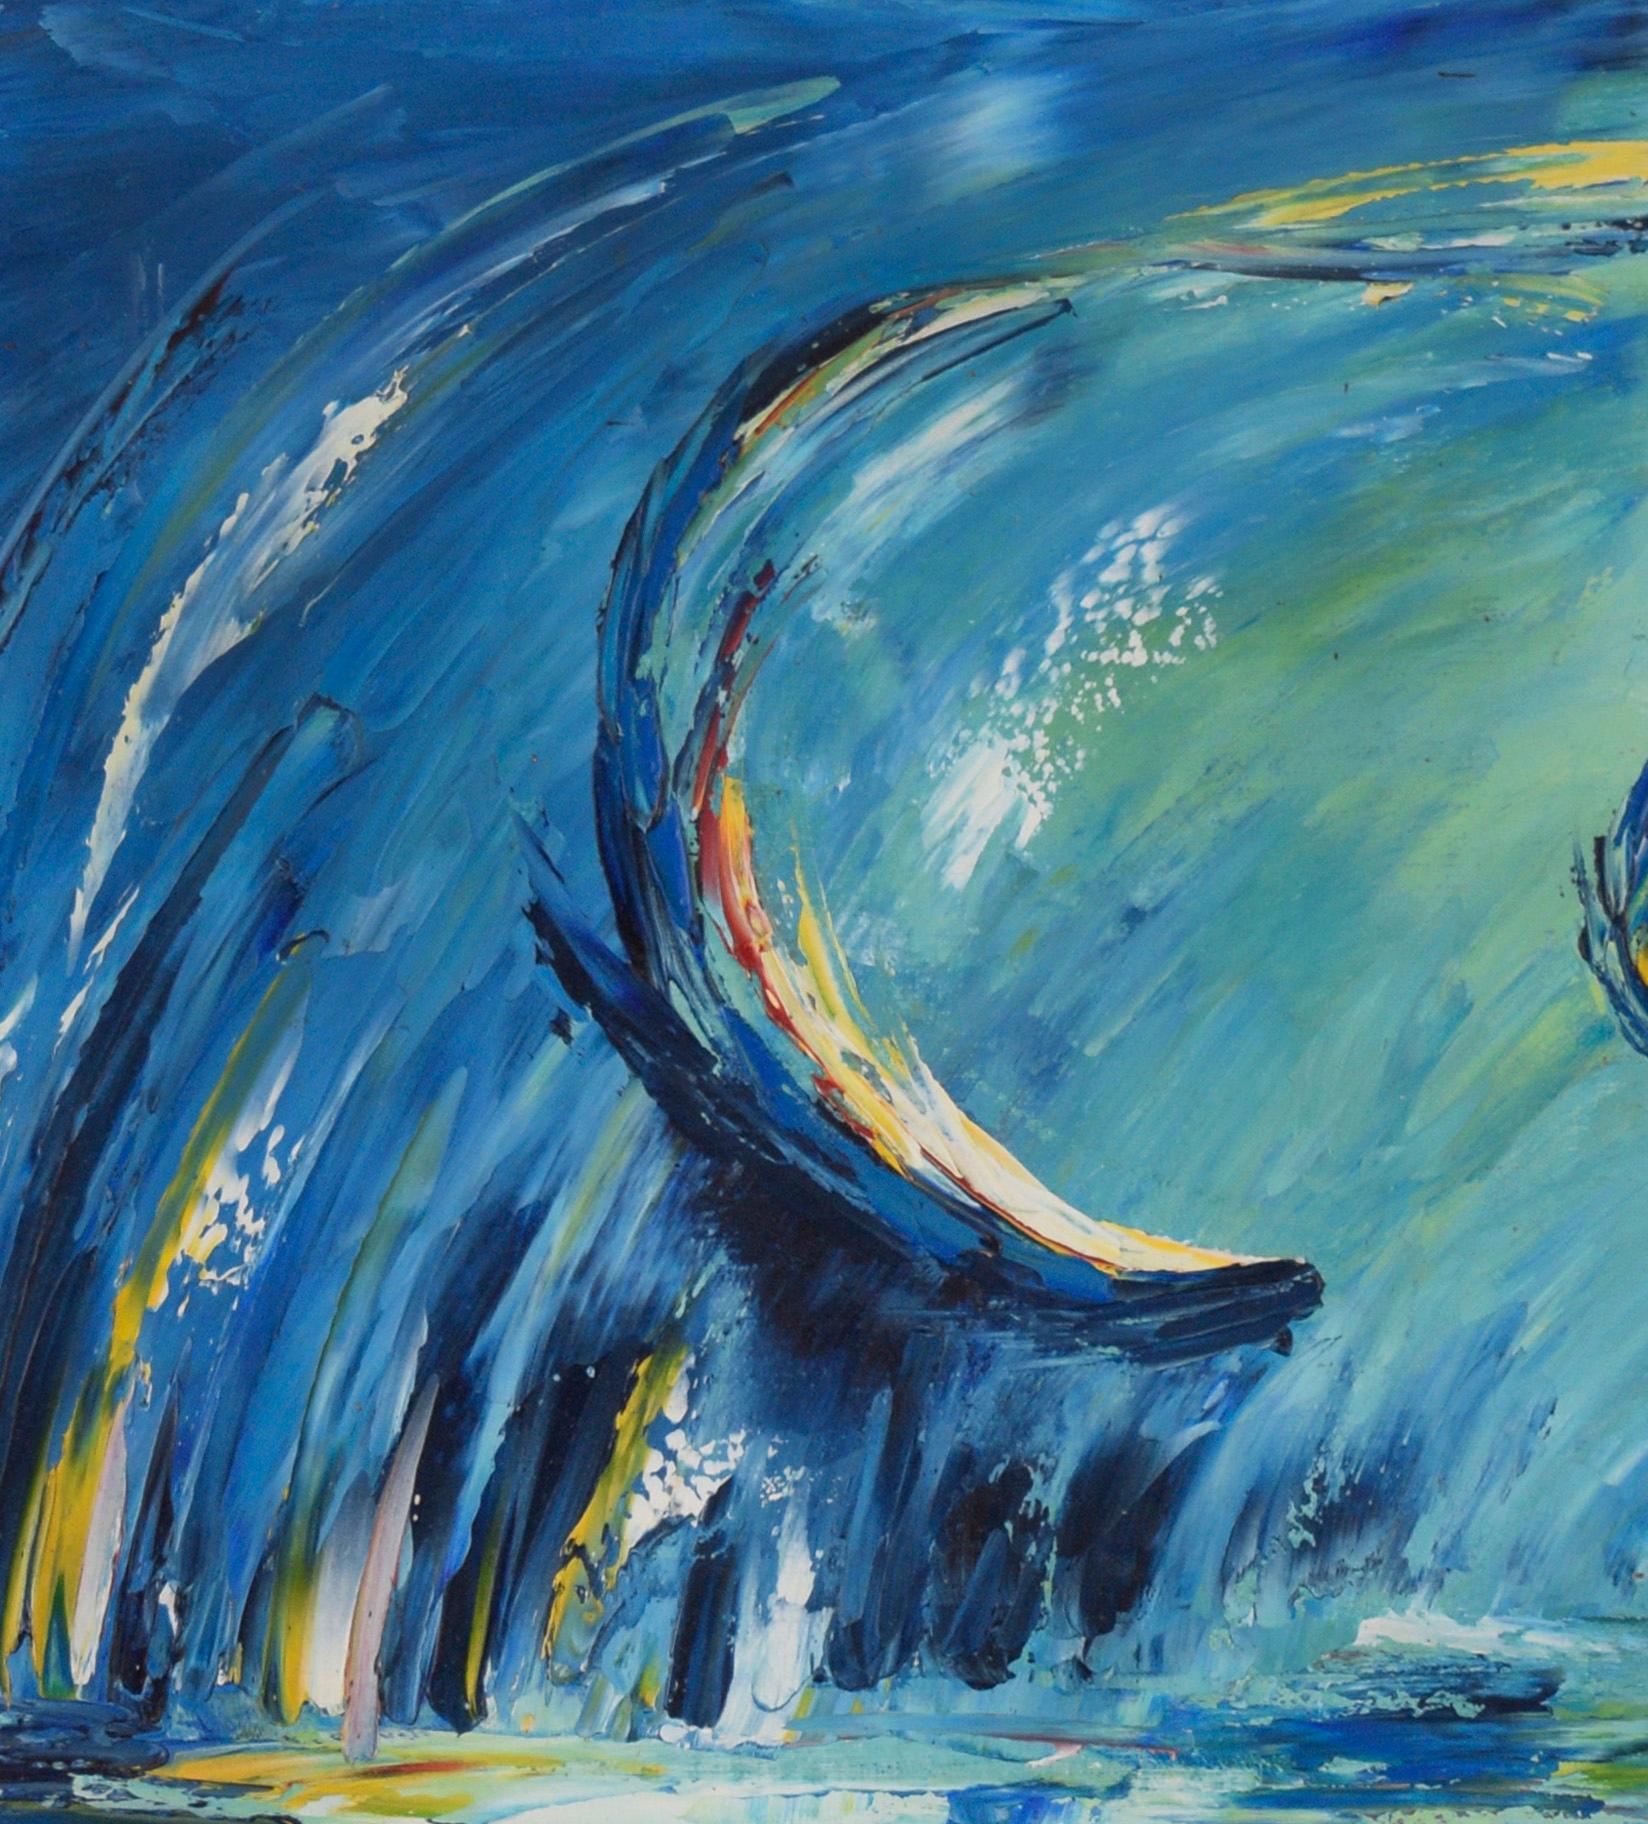 The Dance of water oil on canvas 1968
Abstract expressionist painting of three fish circling the water as the focal point. Hues of dark blue fade to light with hints of yellows and reds. Signed 